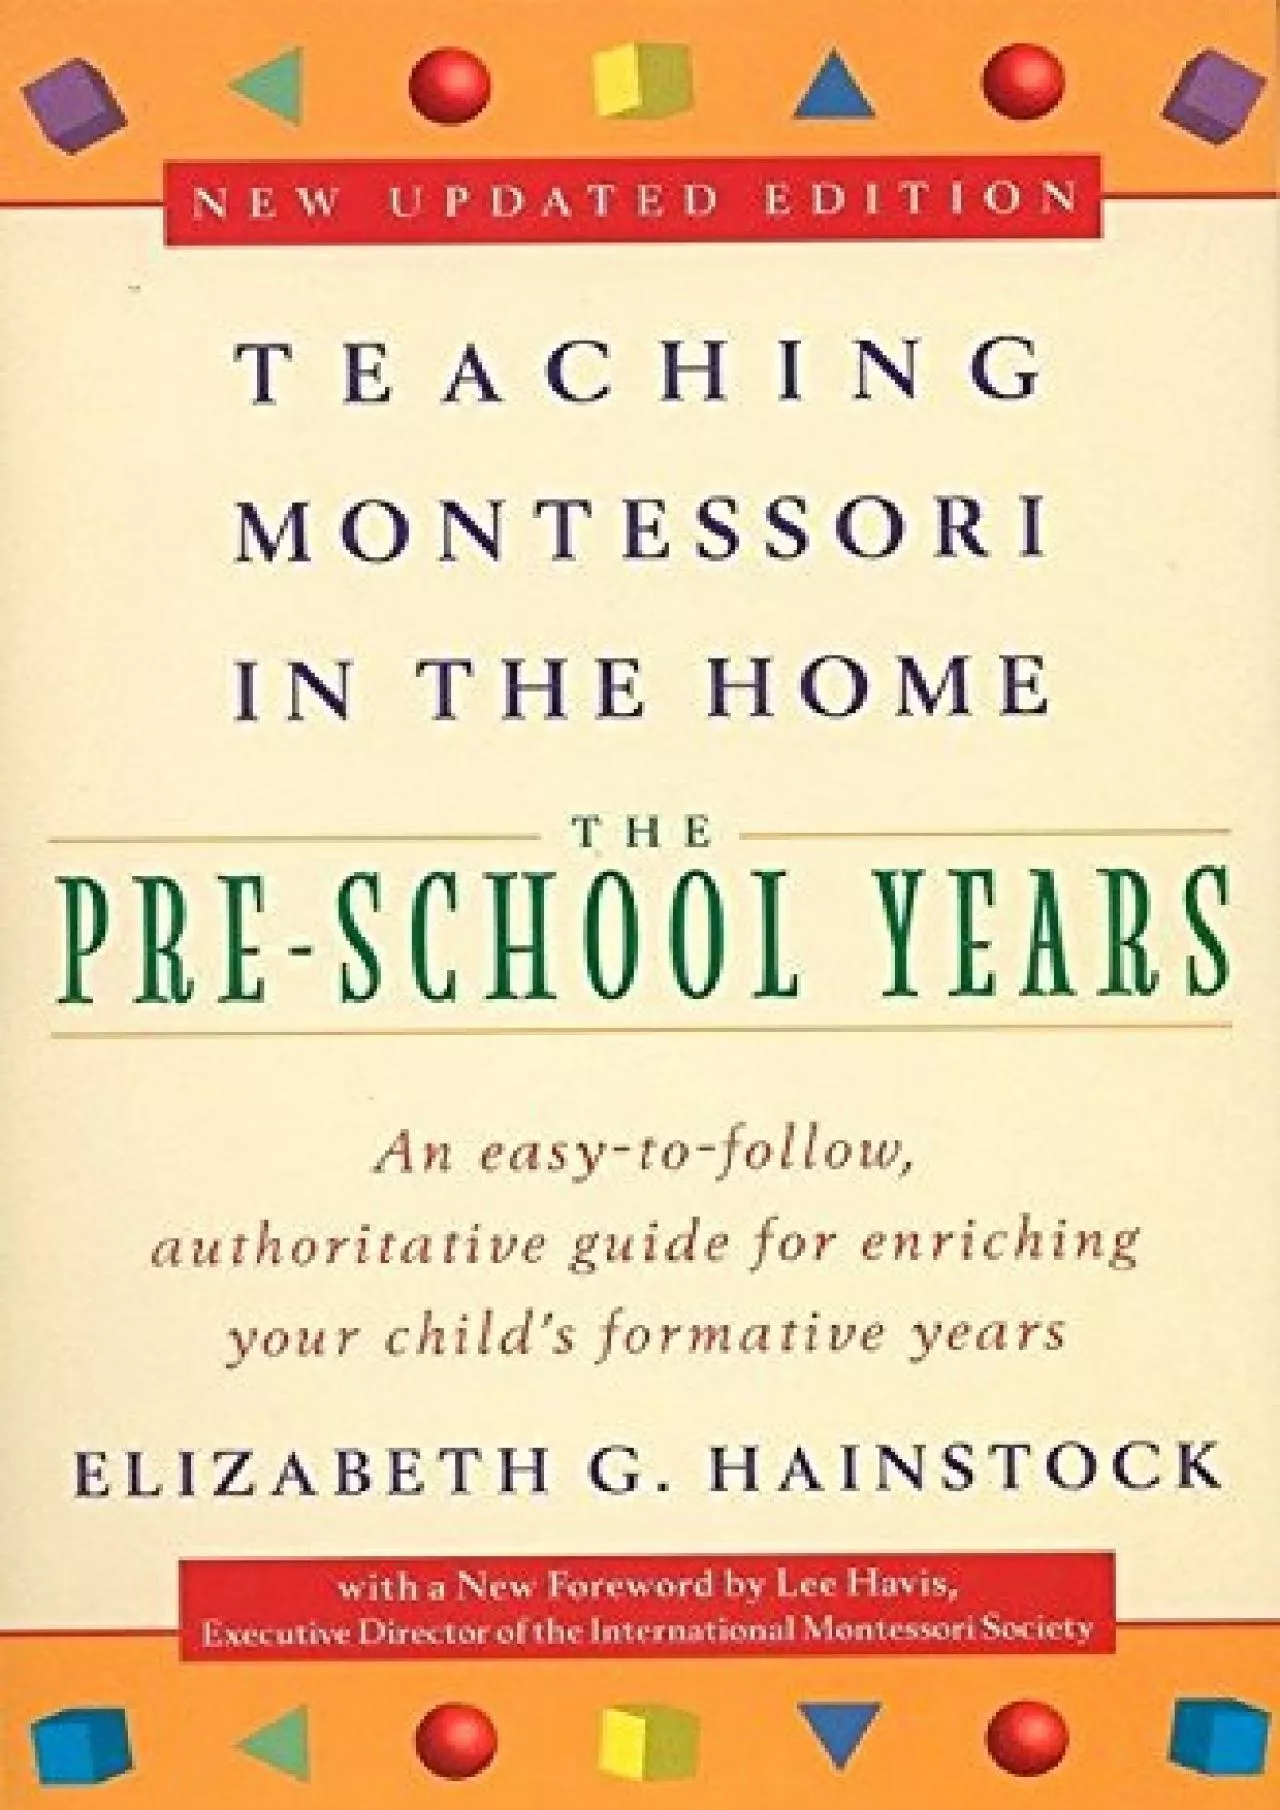 [DOWNLOAD] Teaching Montessori in the Home: Pre-School Years: The Pre-School Years